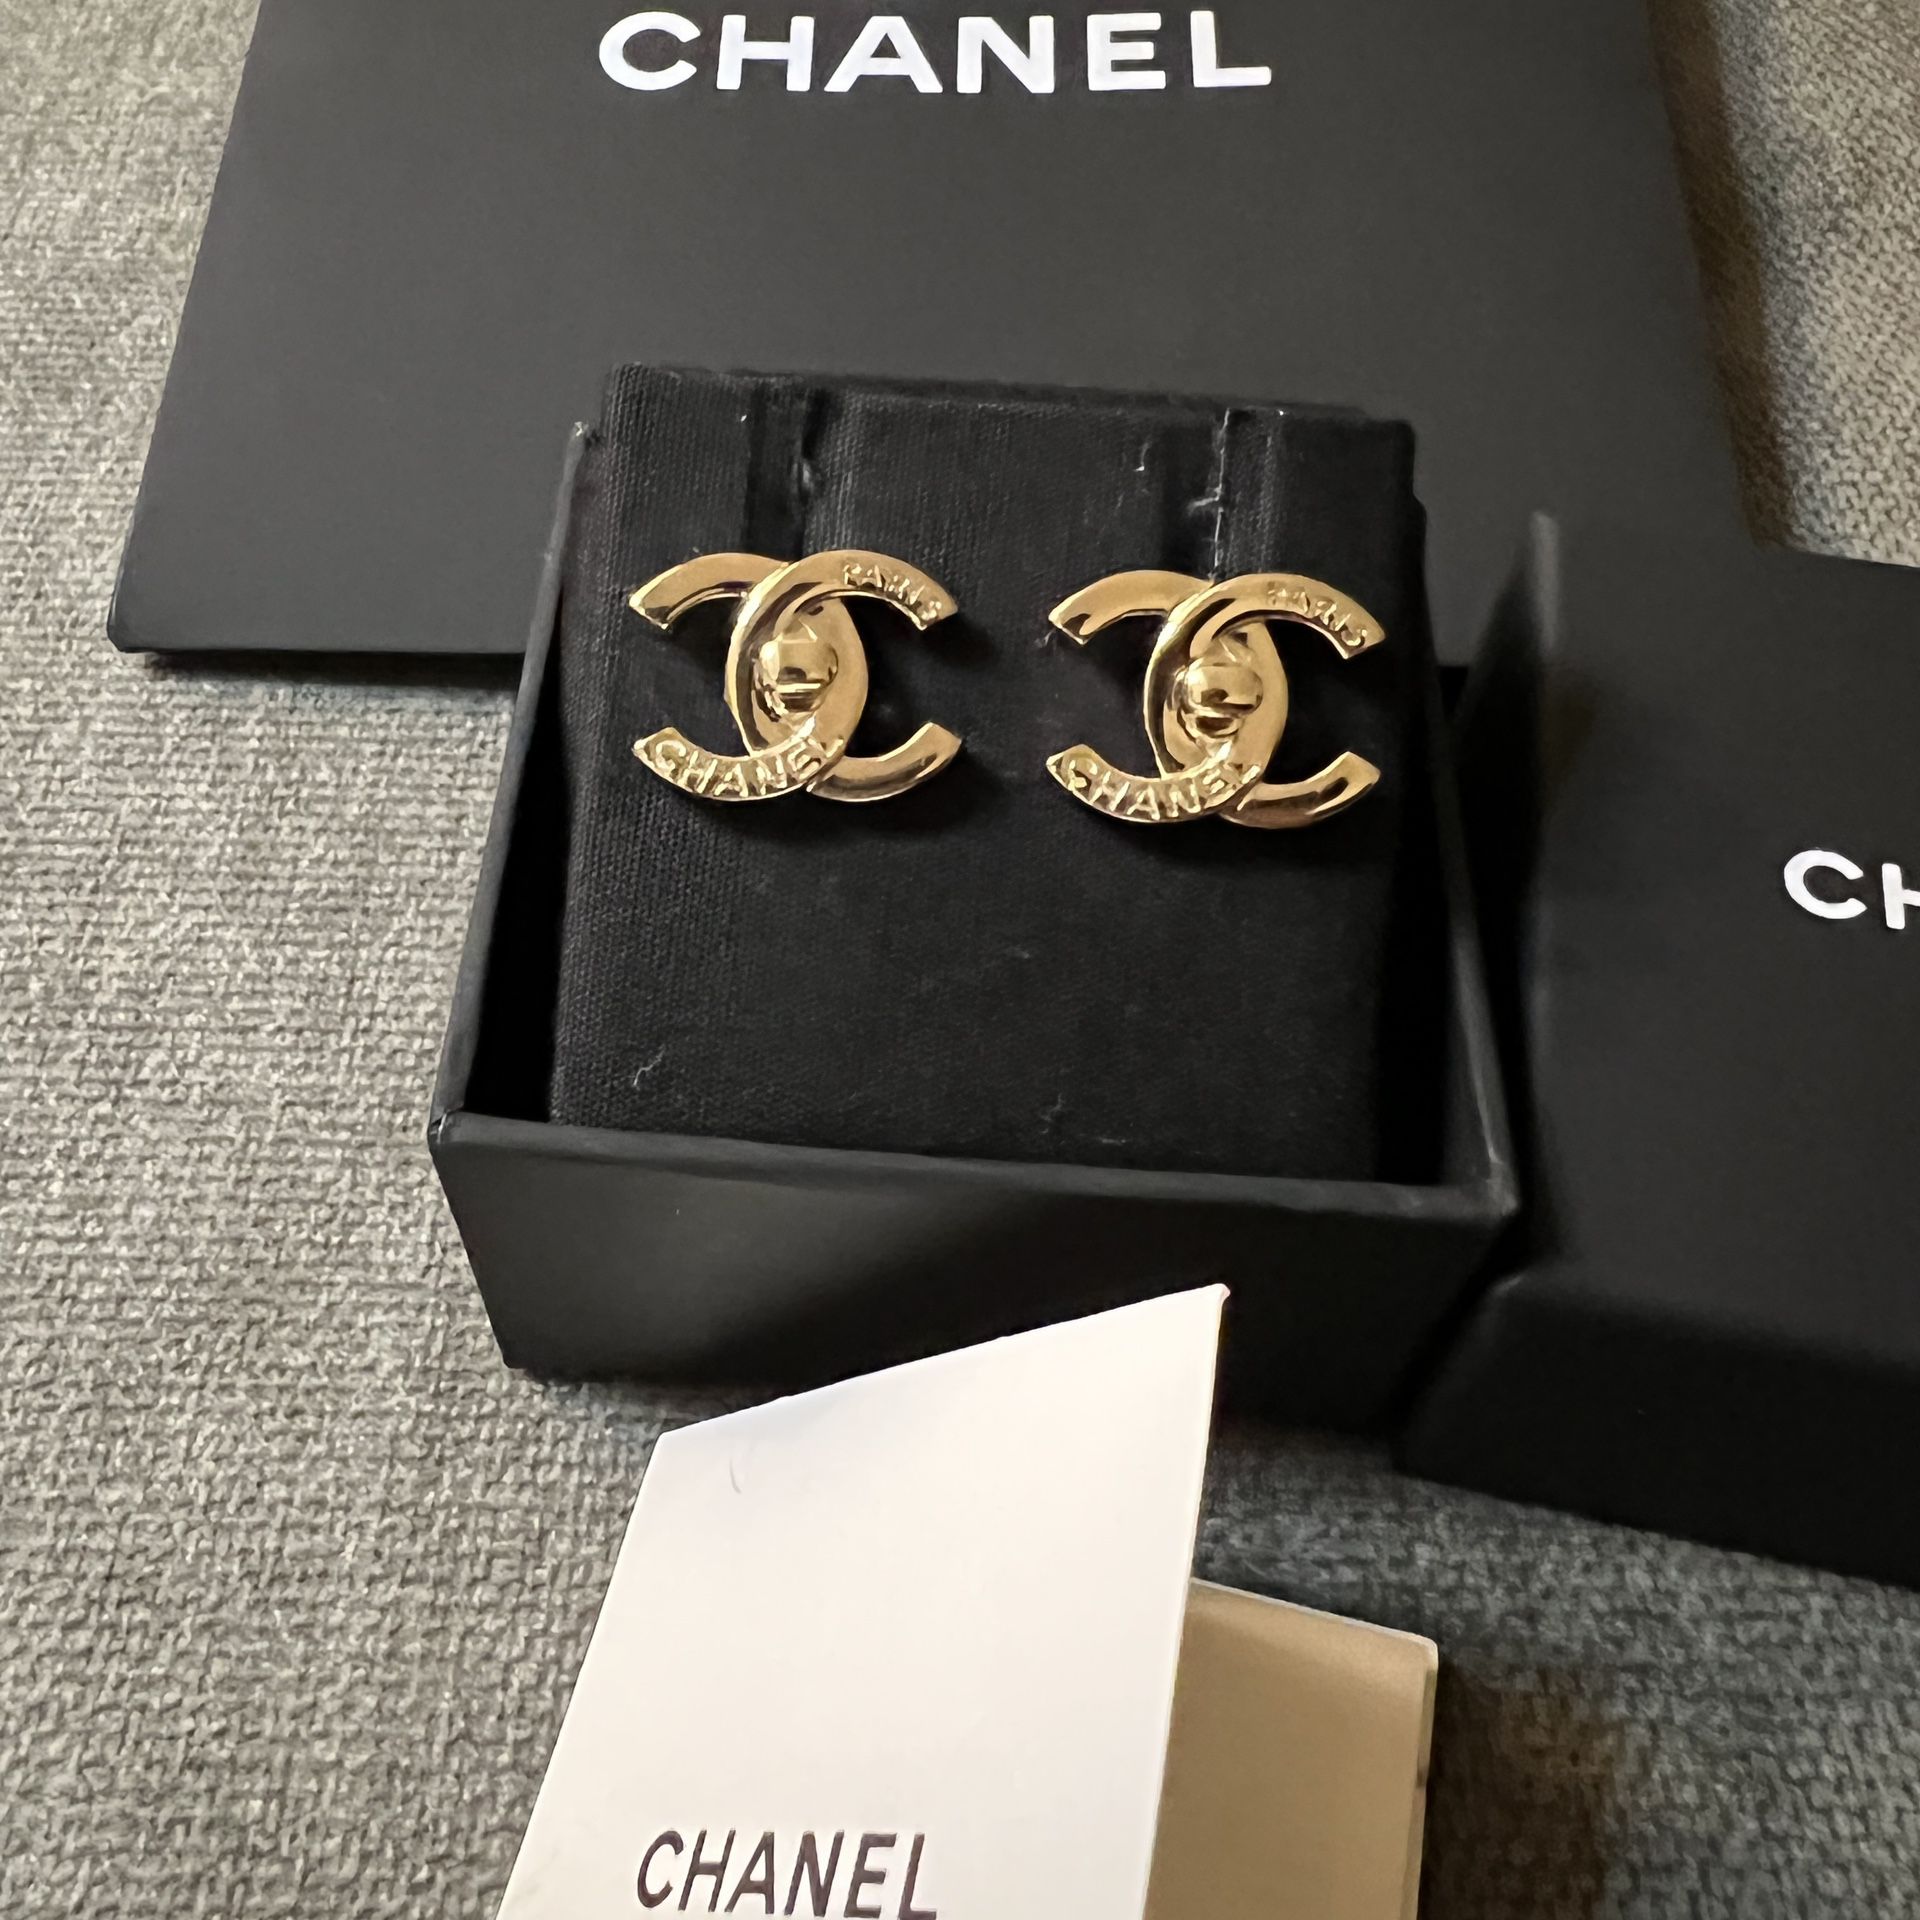 Chanel CC Turn Lock Earrings Gold Tone 21S – Coco Approved Studio